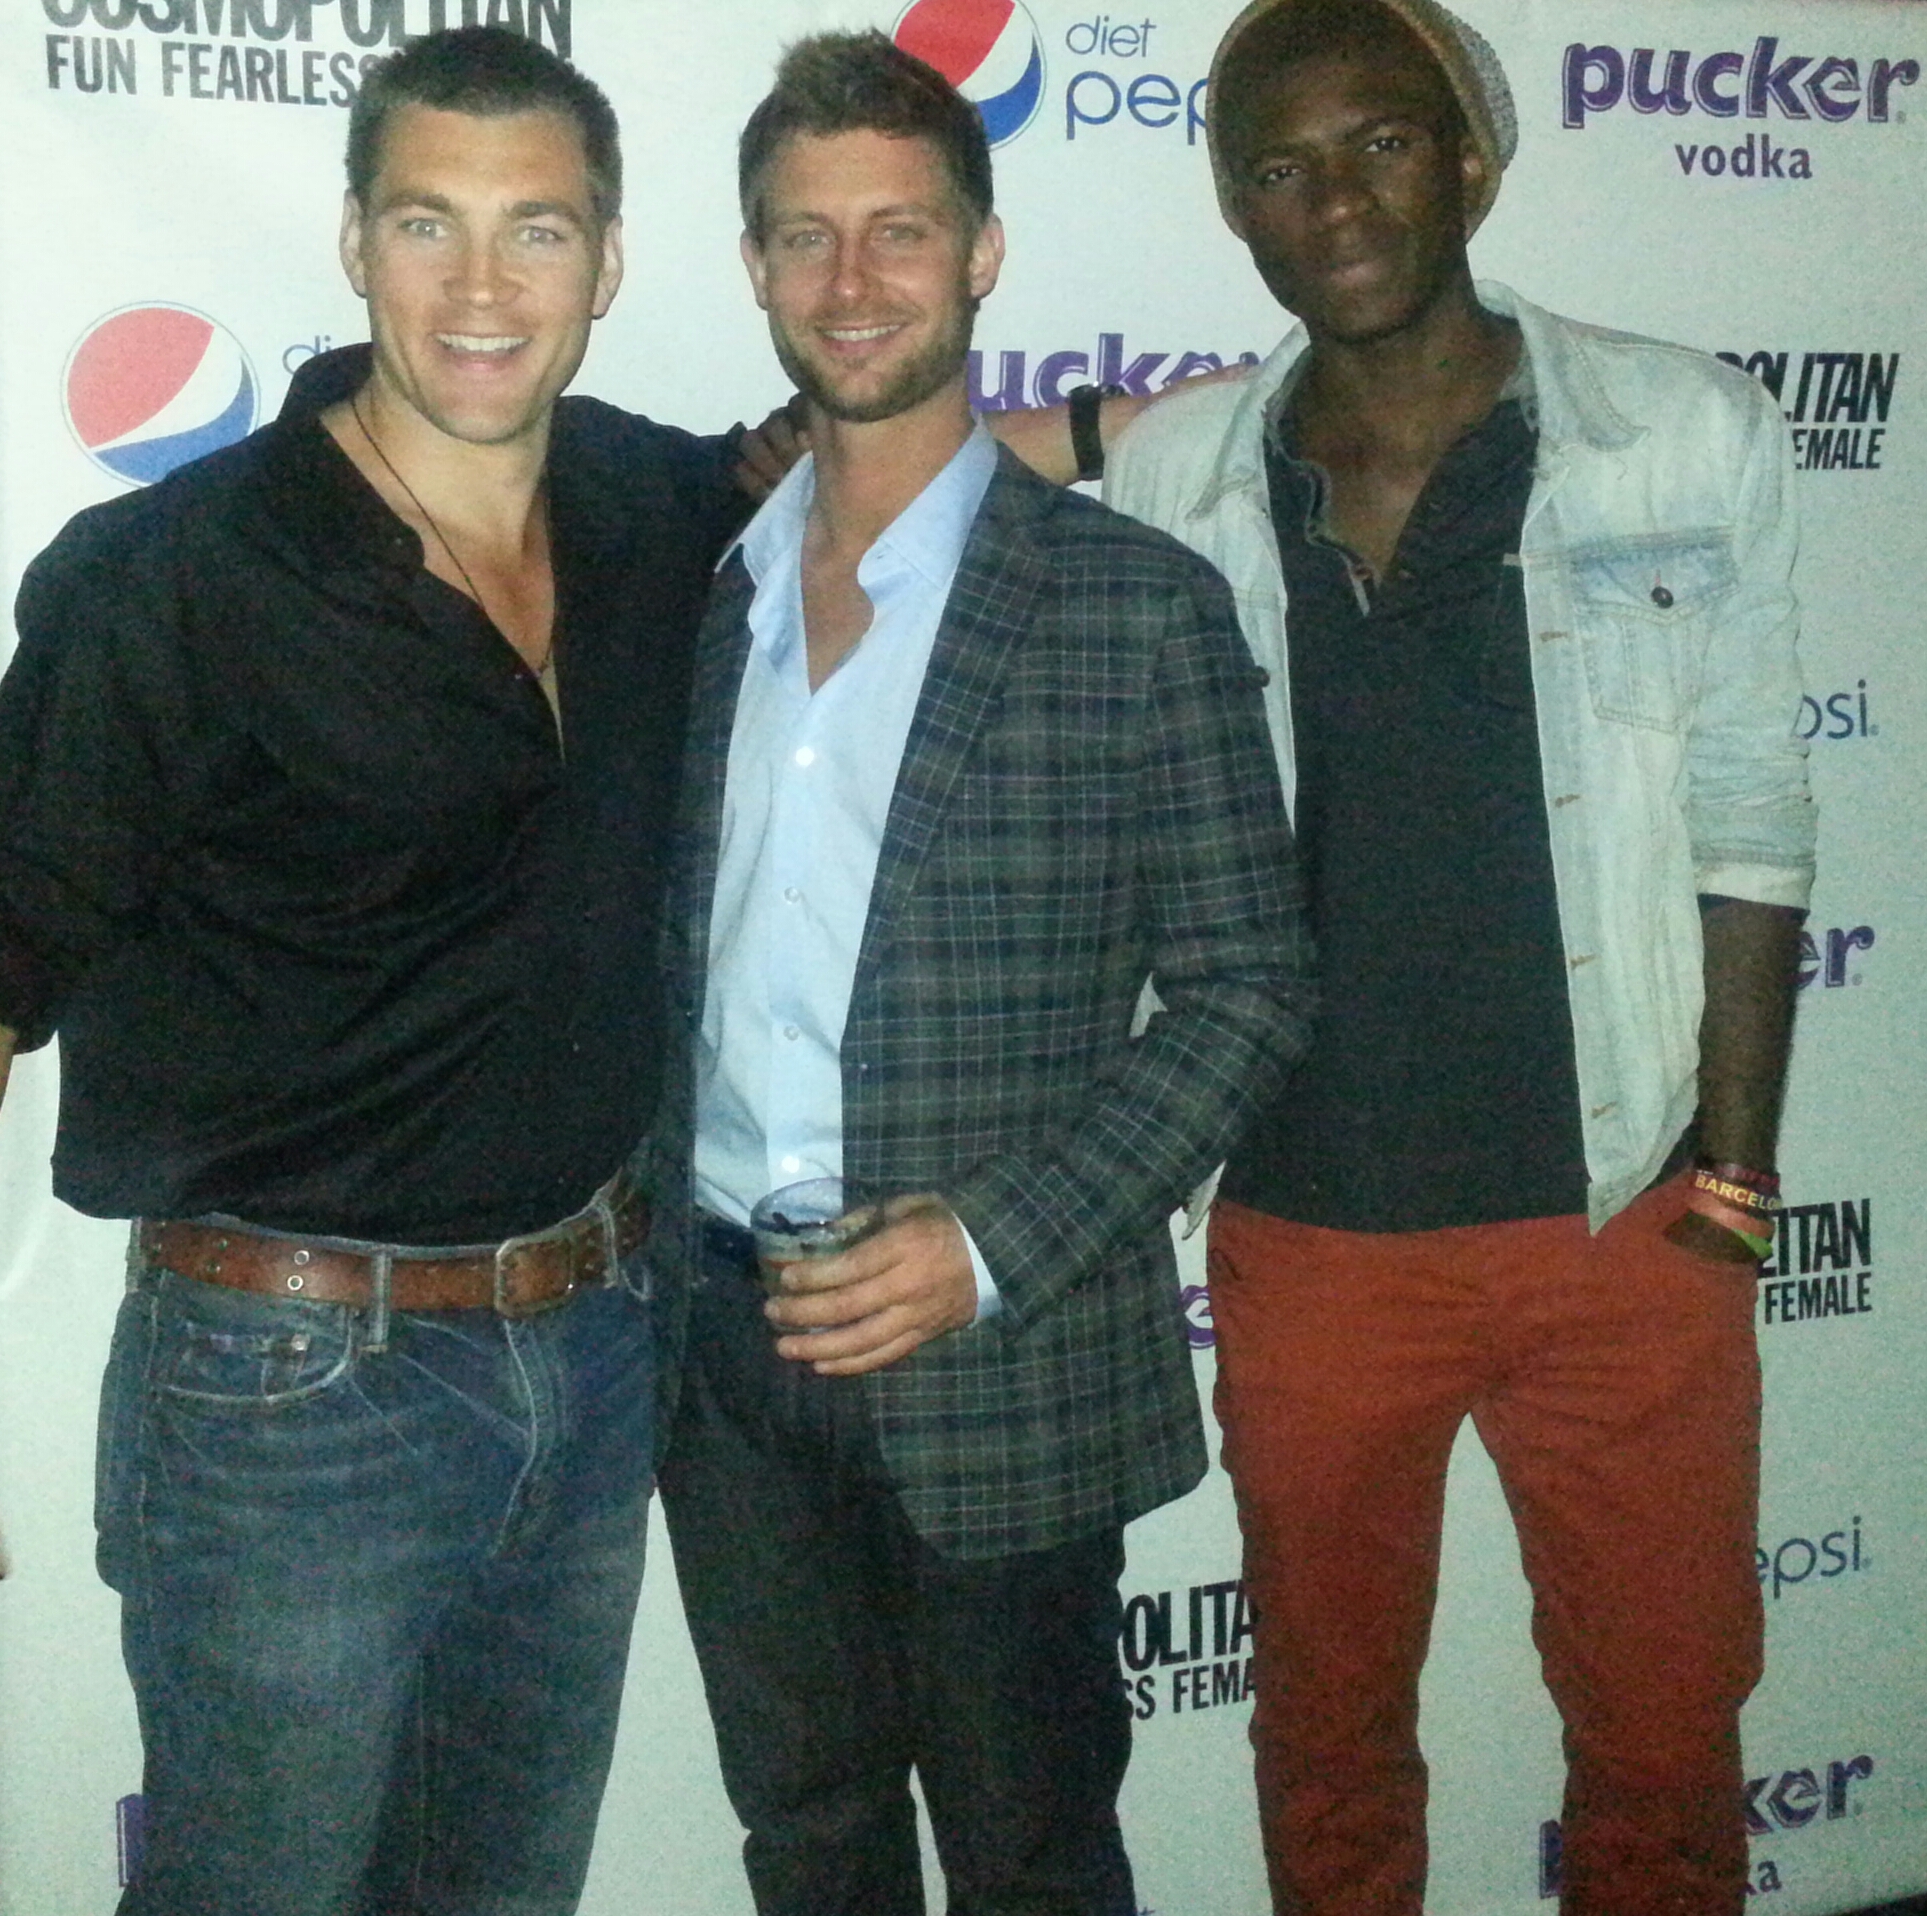 Tyler with other Cosmo Bachelors, Cody Pellerin and Eric Ita.